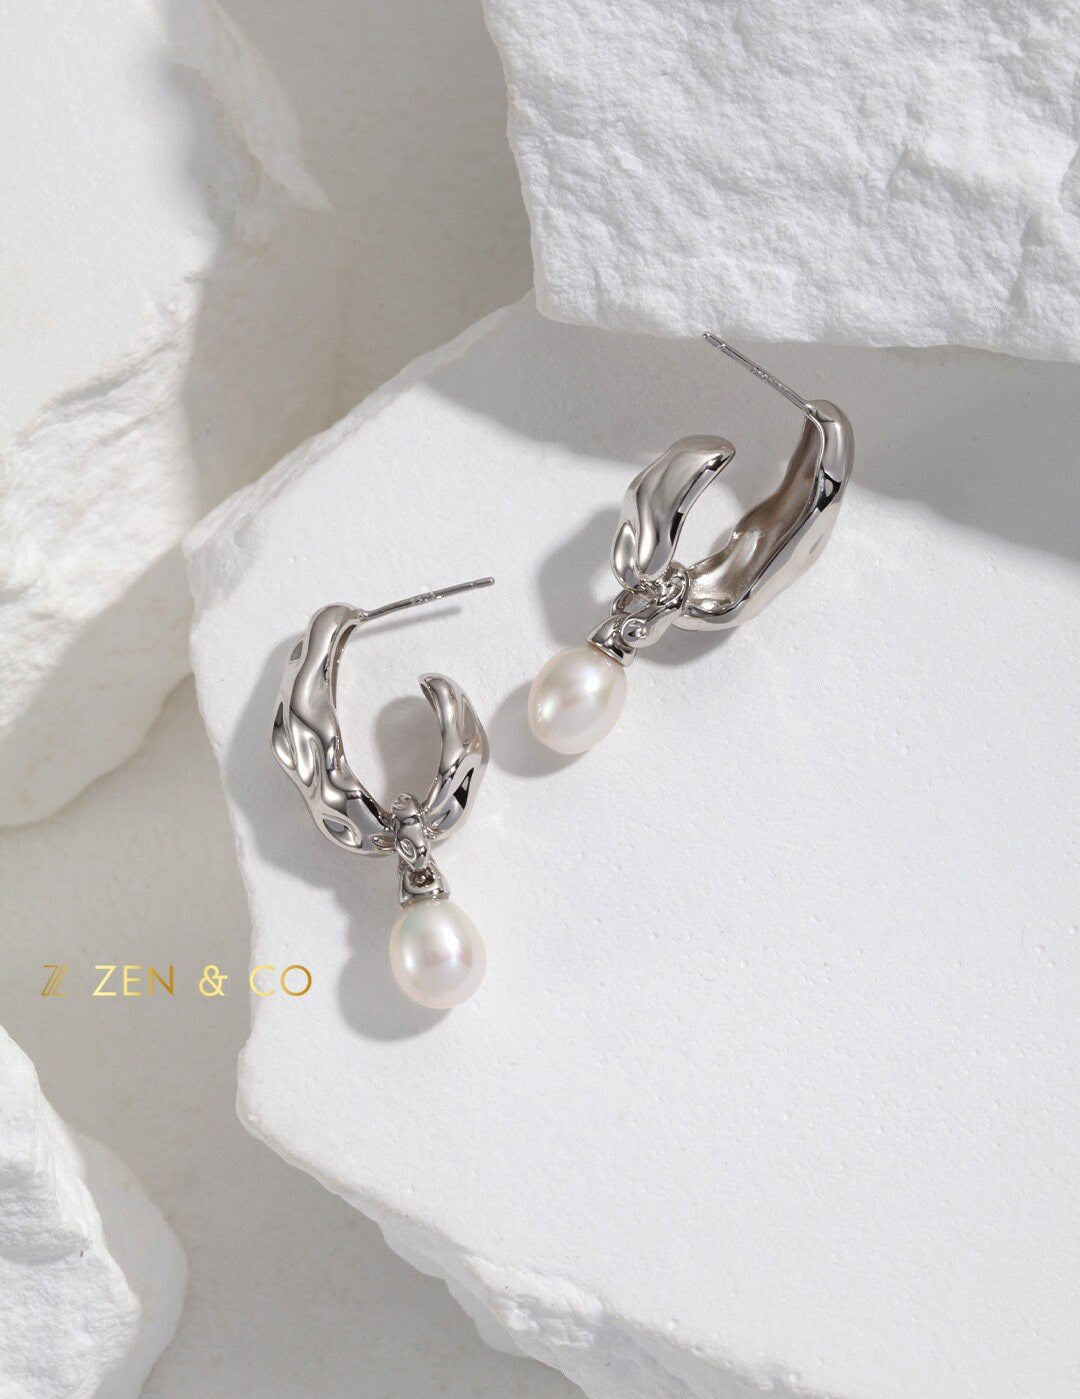 SCARF Abstract Pearl necklace and pearl drop earrings - ZEN&CO Studio